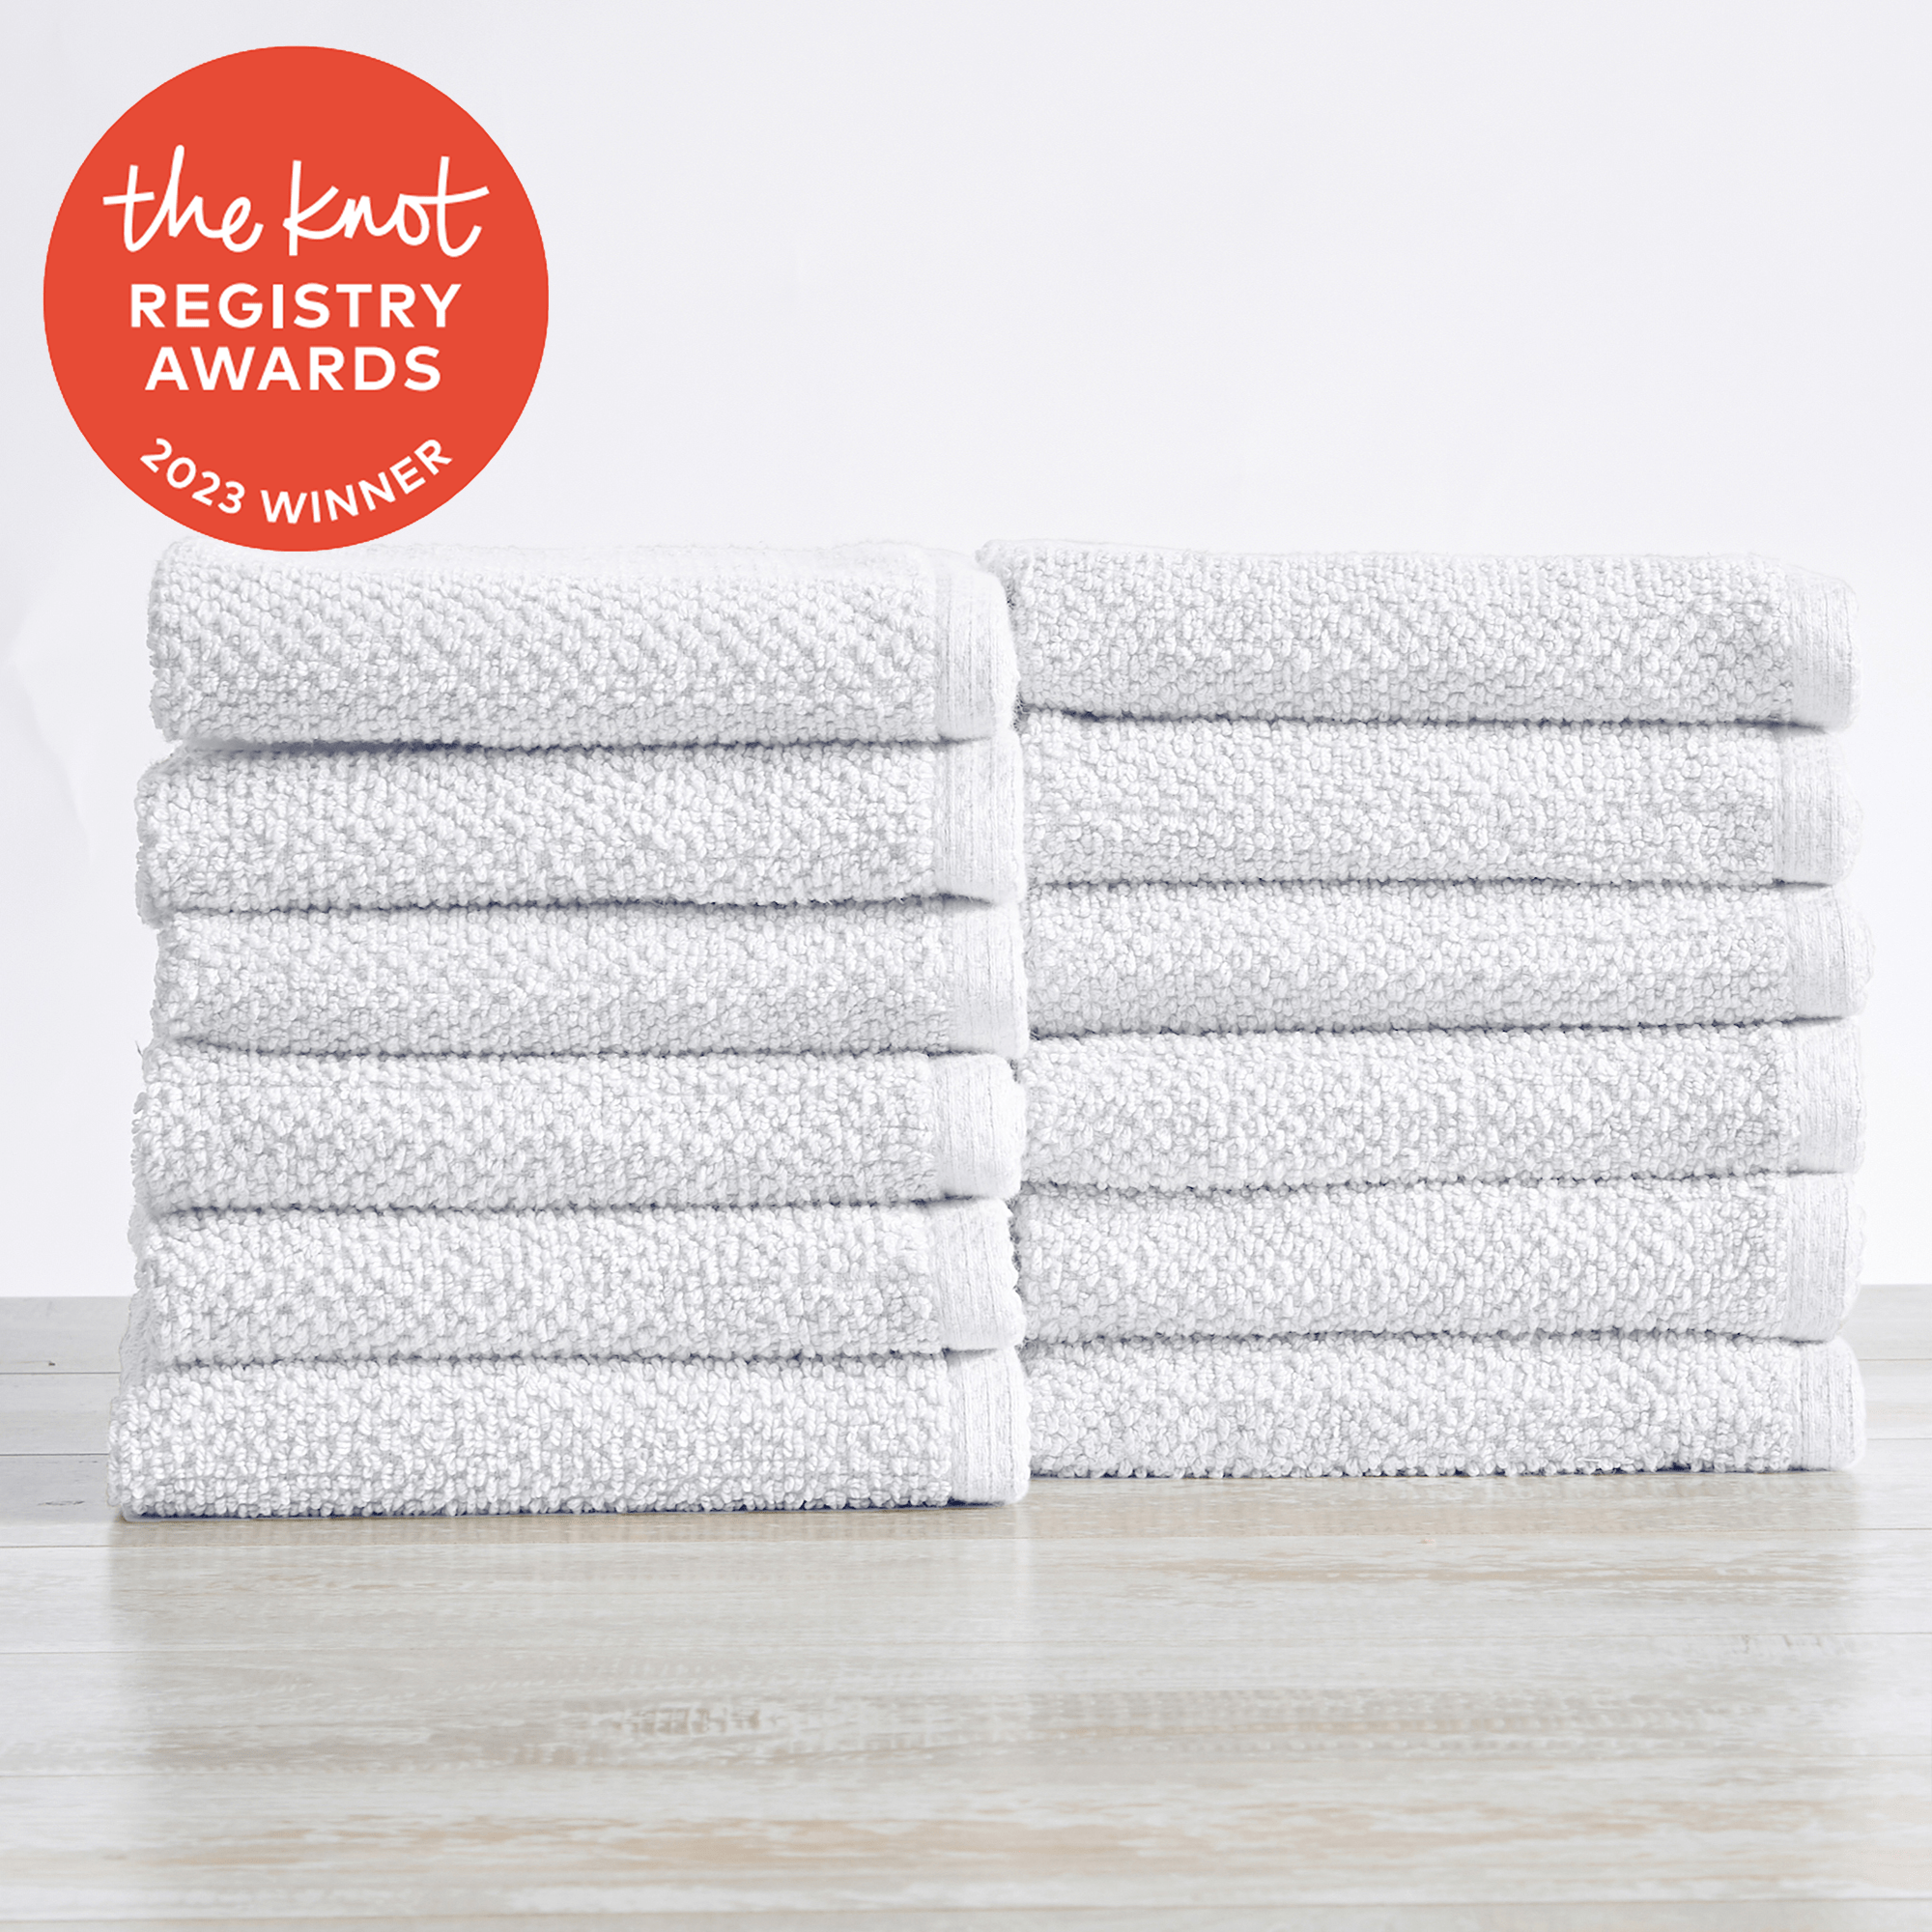 Ultra Absorbent Popcorn Bath Towels  Acacia Collection by Great Bay Home